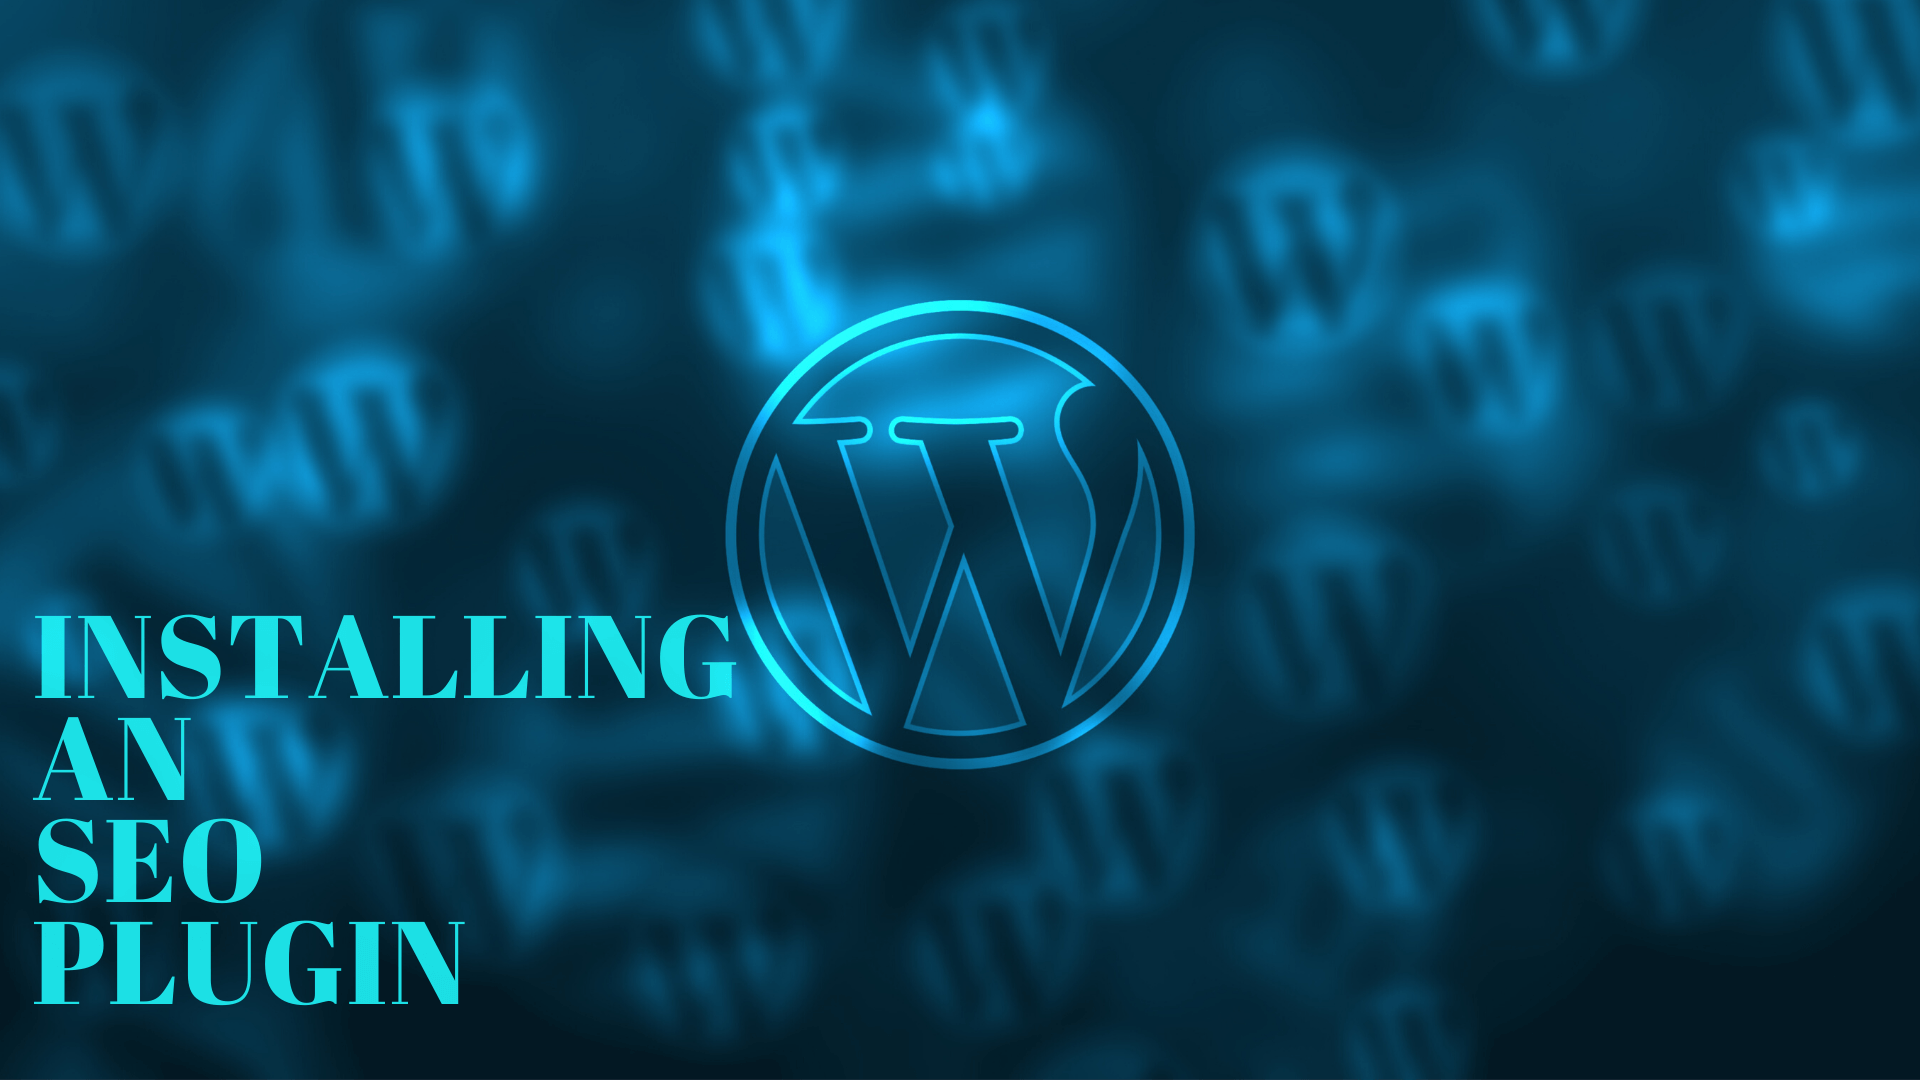 Why Installing an SEO Plugin on your WordPress site?